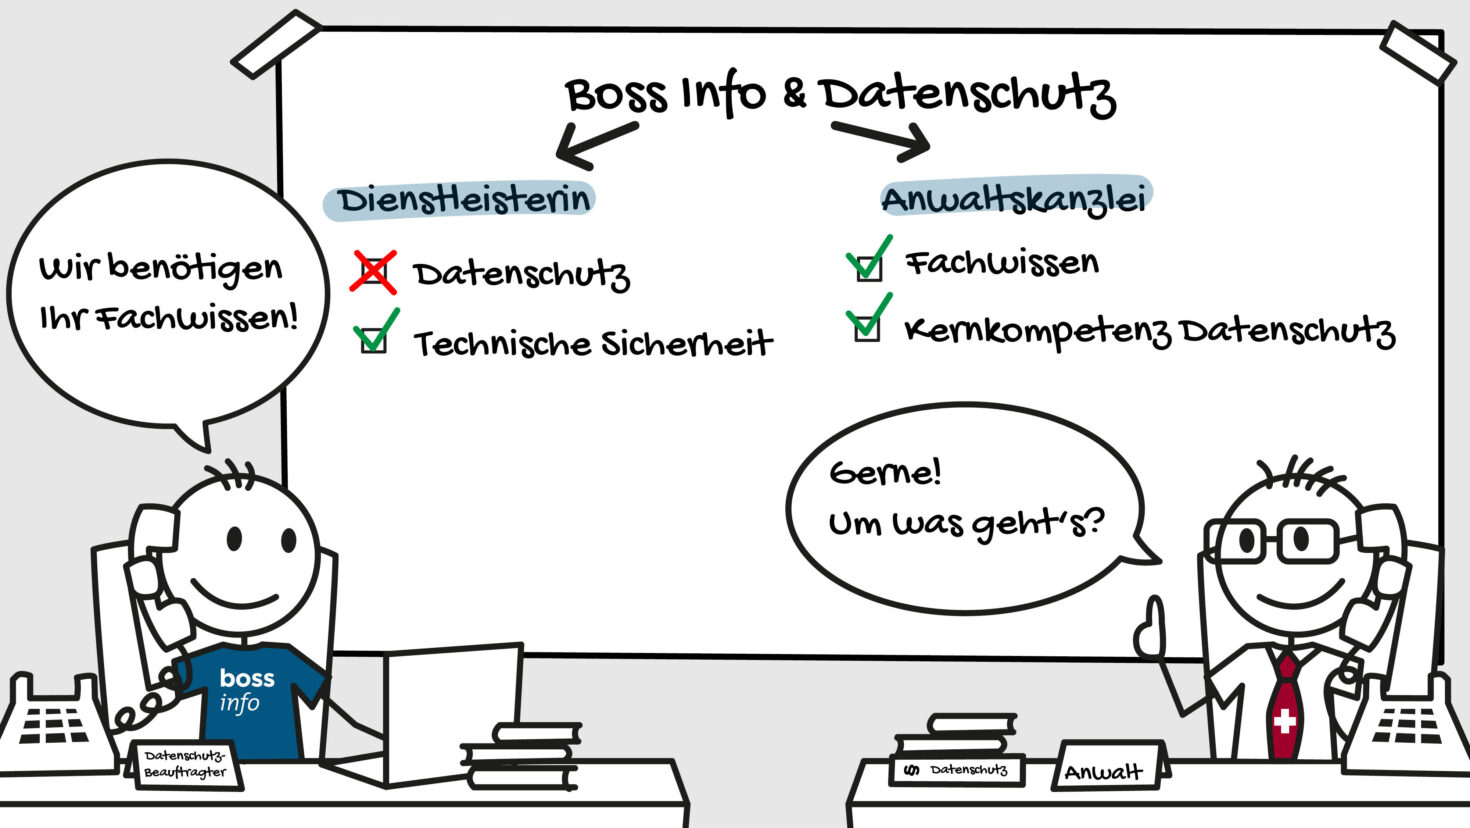 dieAdvokatur.ch supports Boss Info’s Data Protection Officer